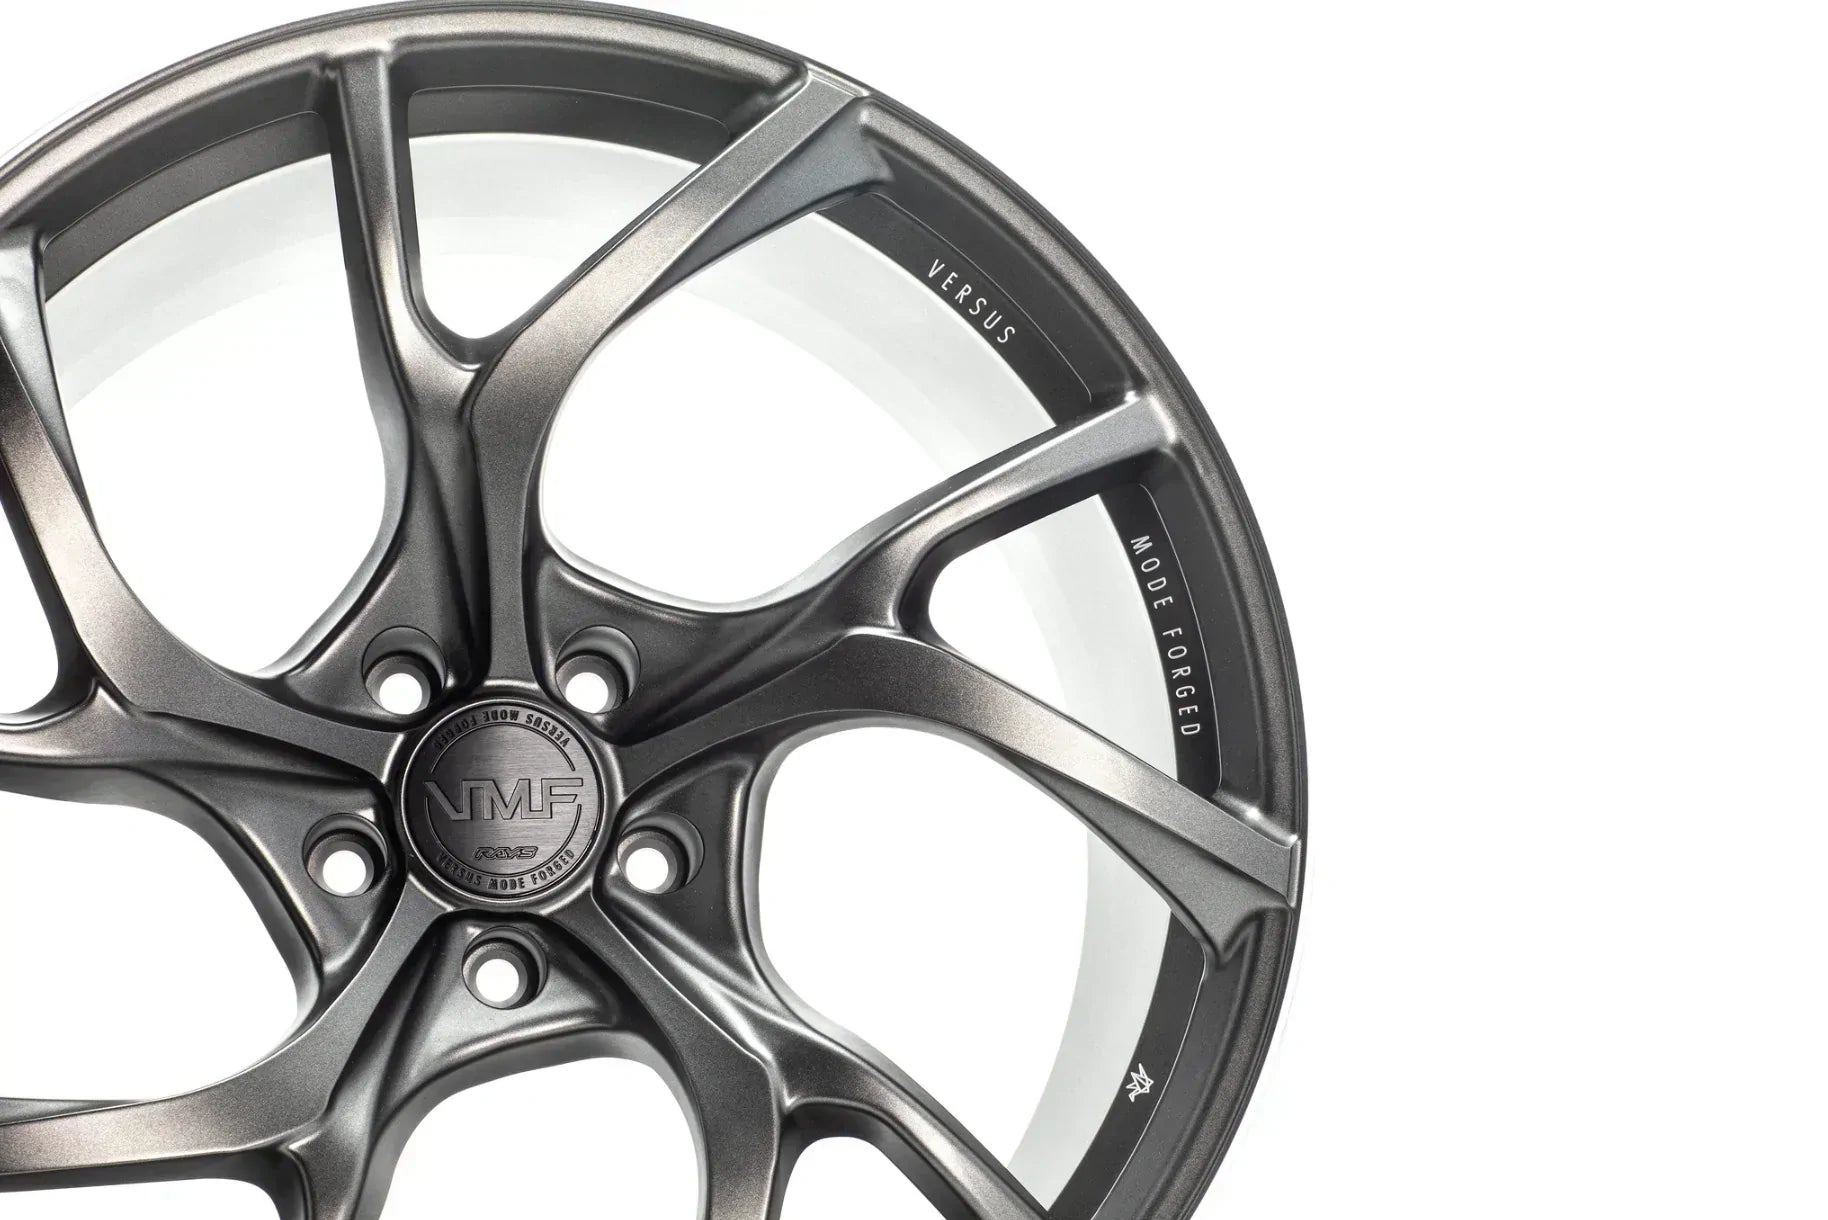 Versus Mode Forged (VMF) C-01 19x10.5 | 5x114.3